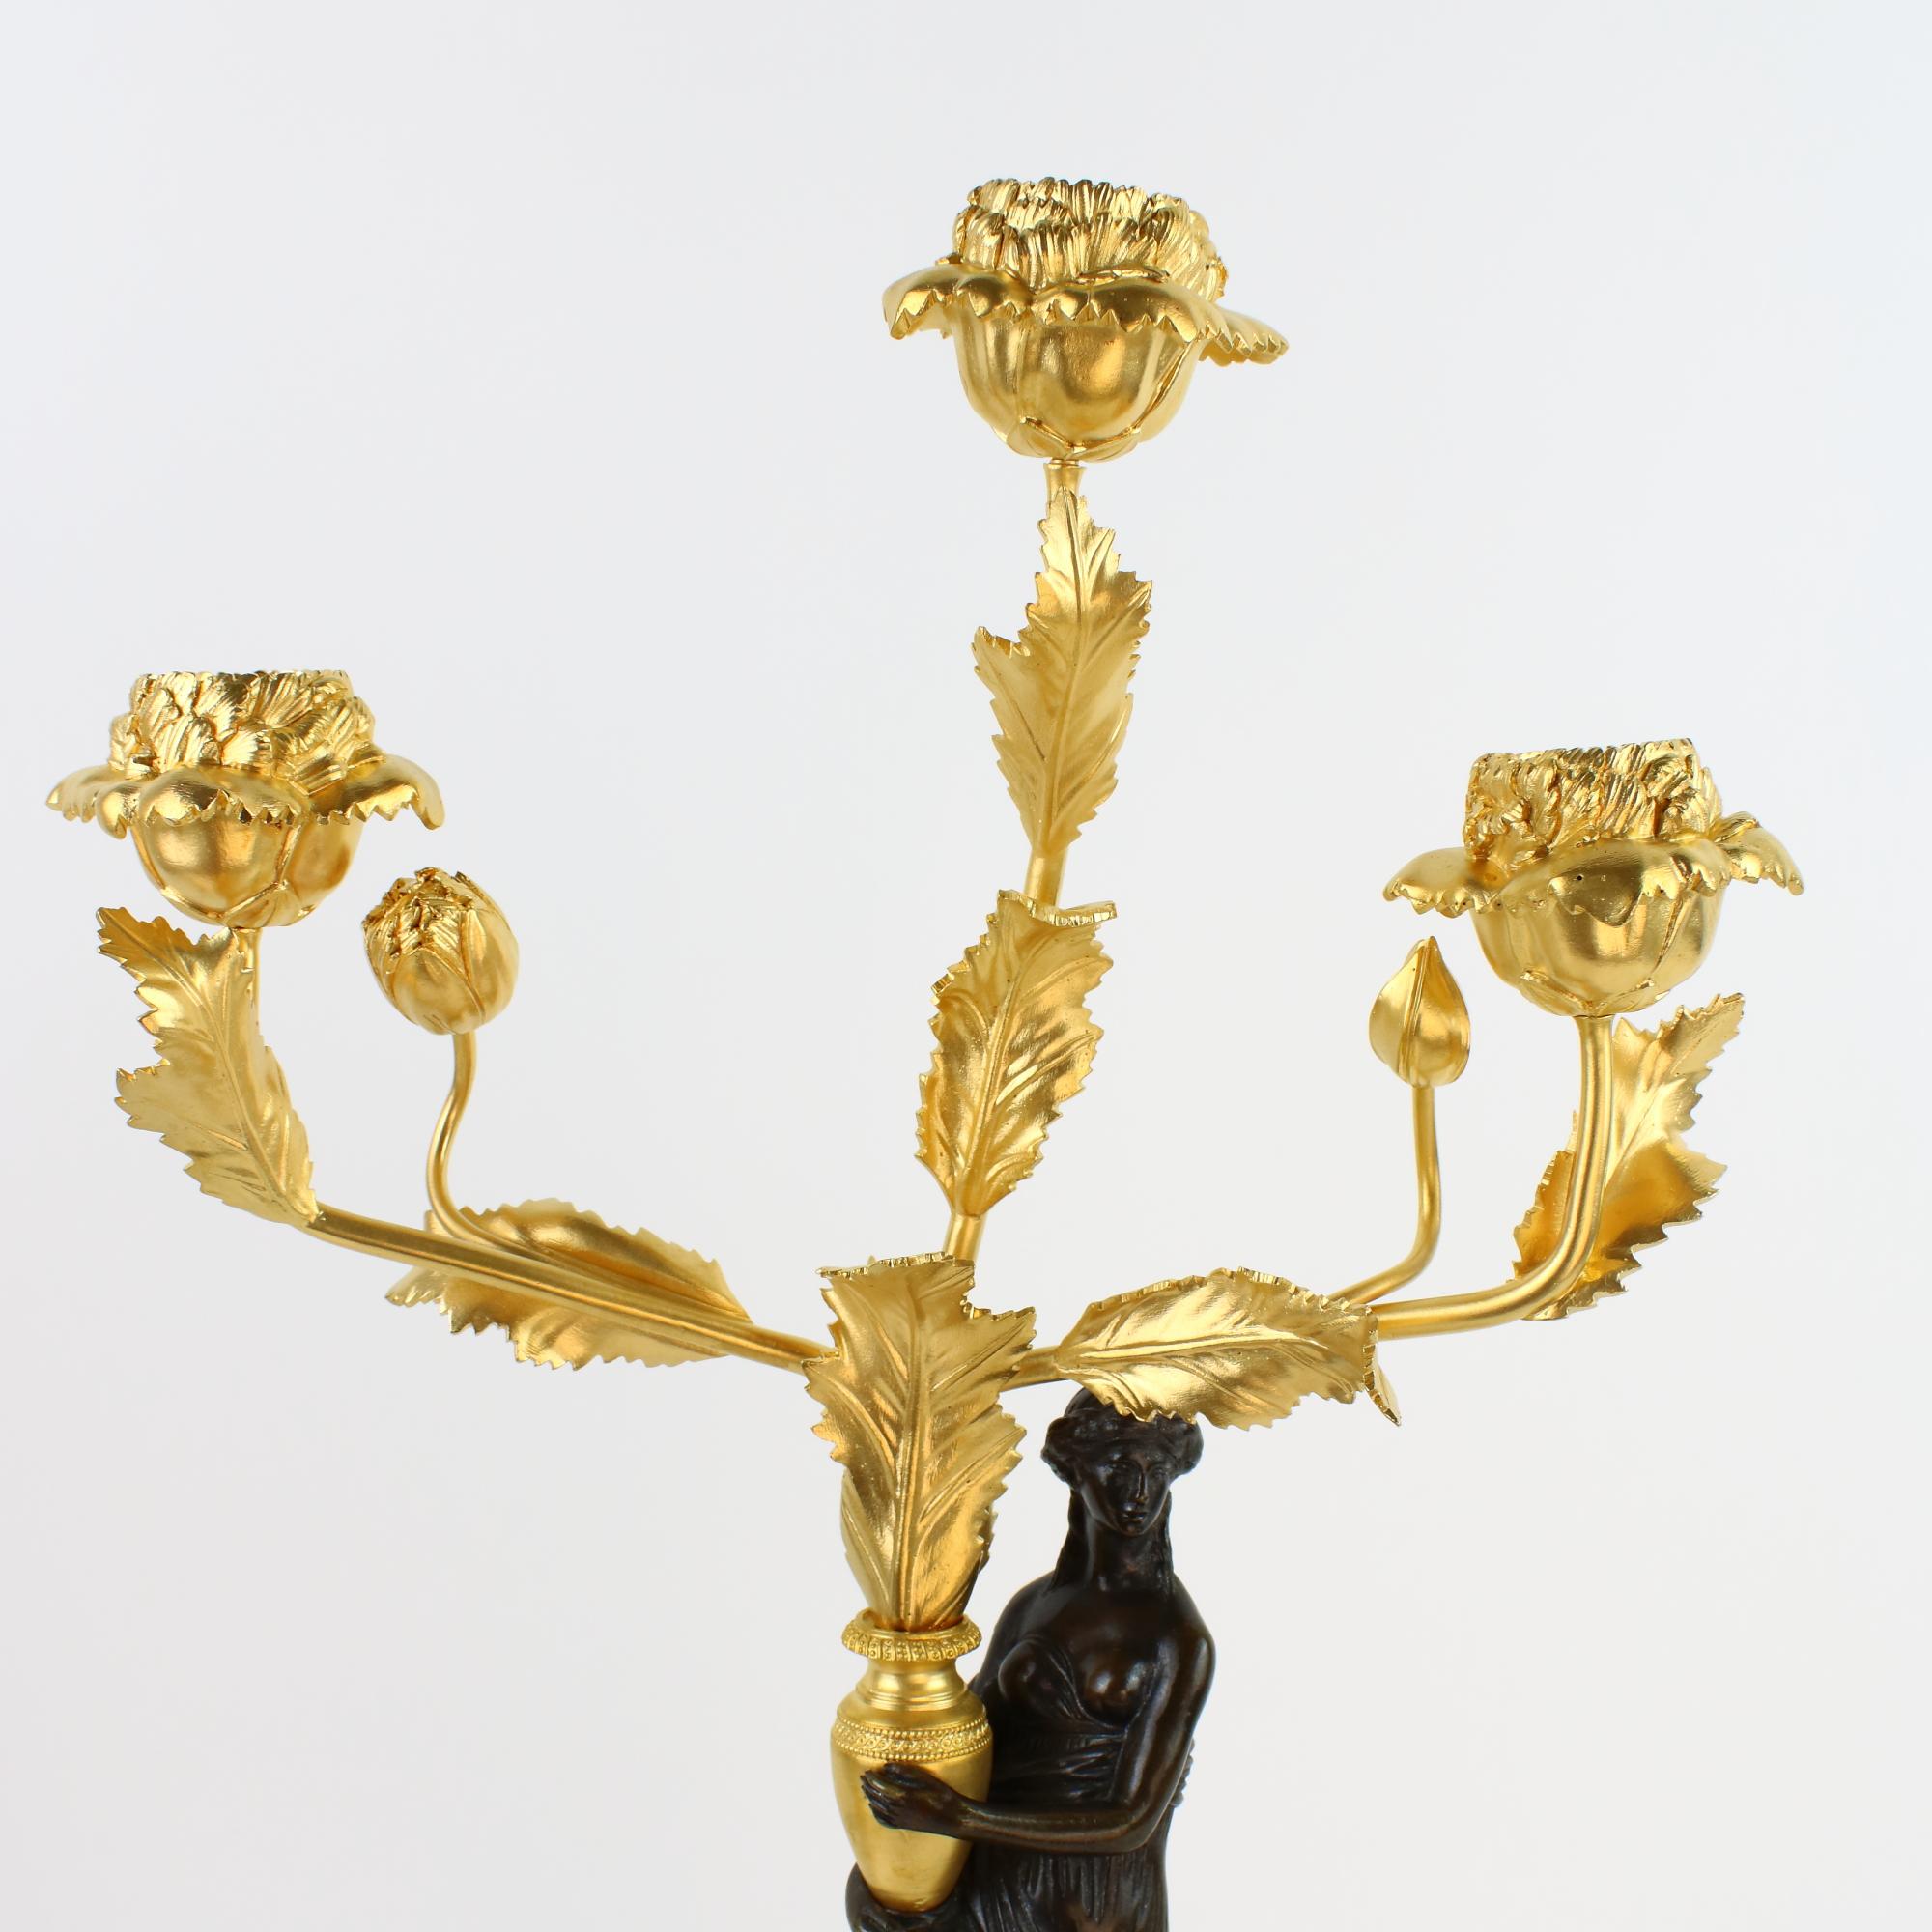 18th/19th Century Pair of Russian Figural Gilt and Patinated Bronze Candelabra For Sale 2